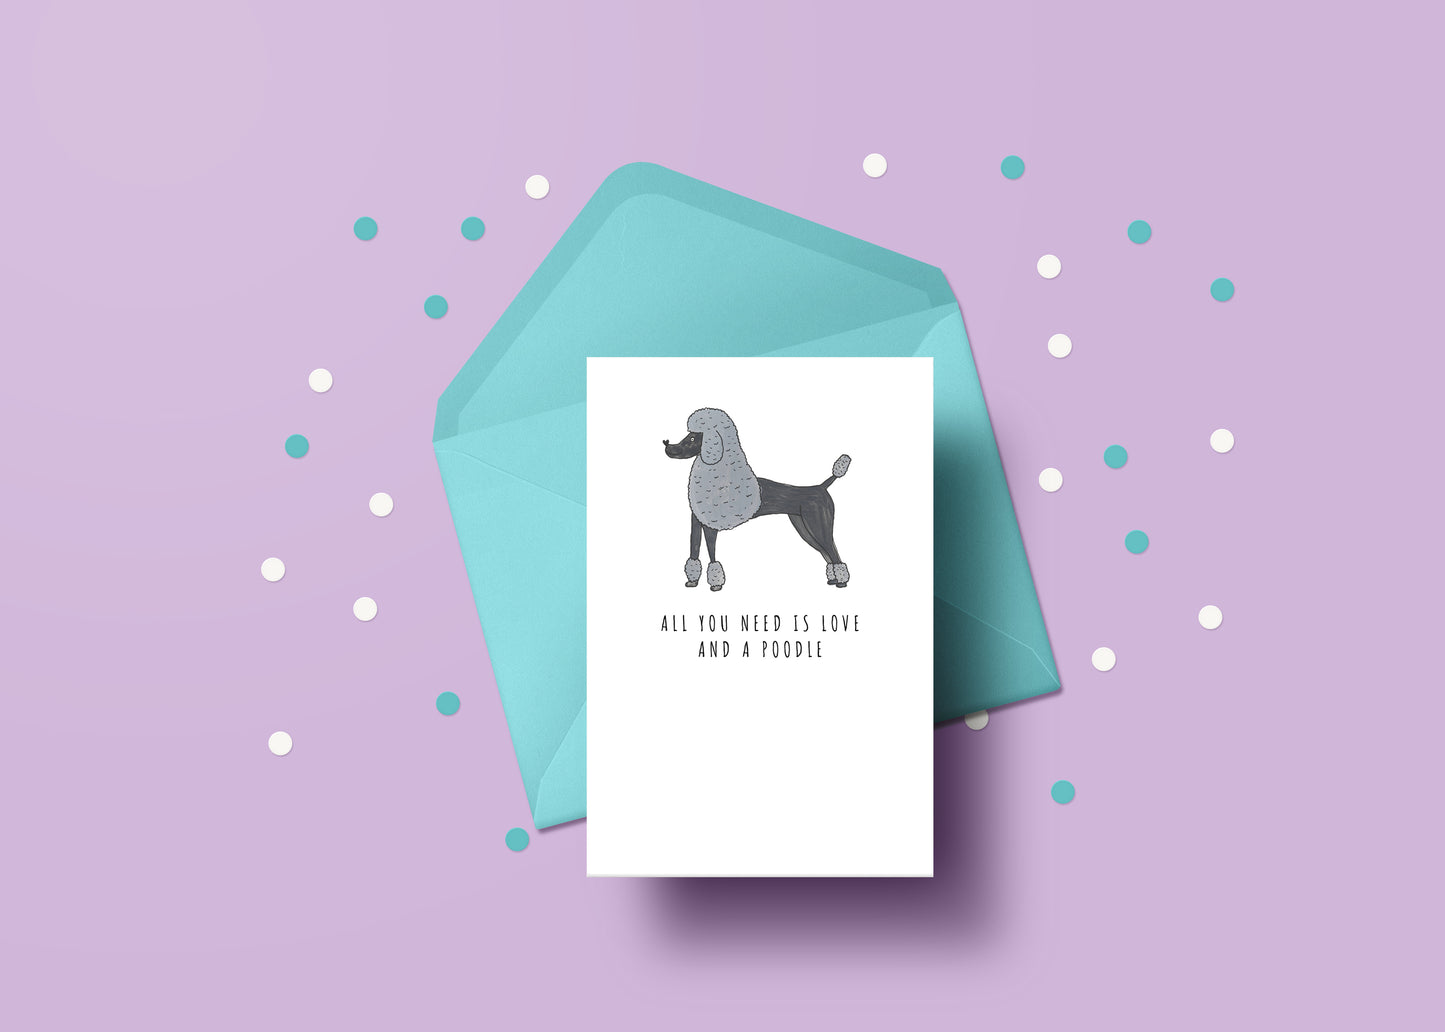 All you need is love and a Poodle card